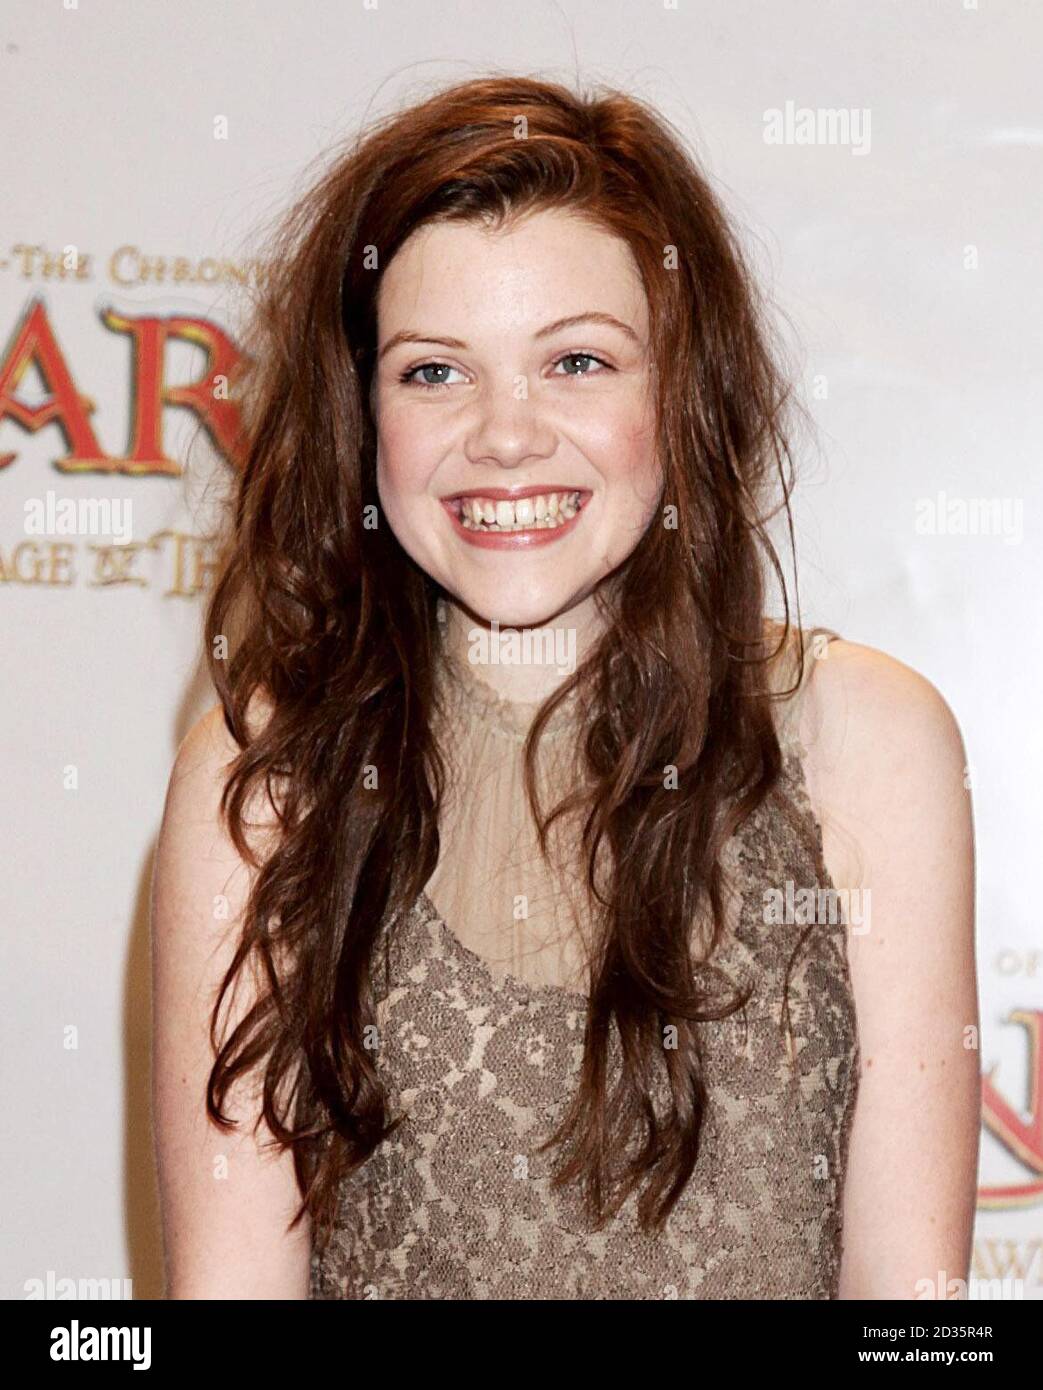 Georgie Henley arriving for the Royal Premiere of The Chronicles Of Narnia: The Voyage Of The Dawn Treader at the Odeon Leicester Square, central London. Stock Photo